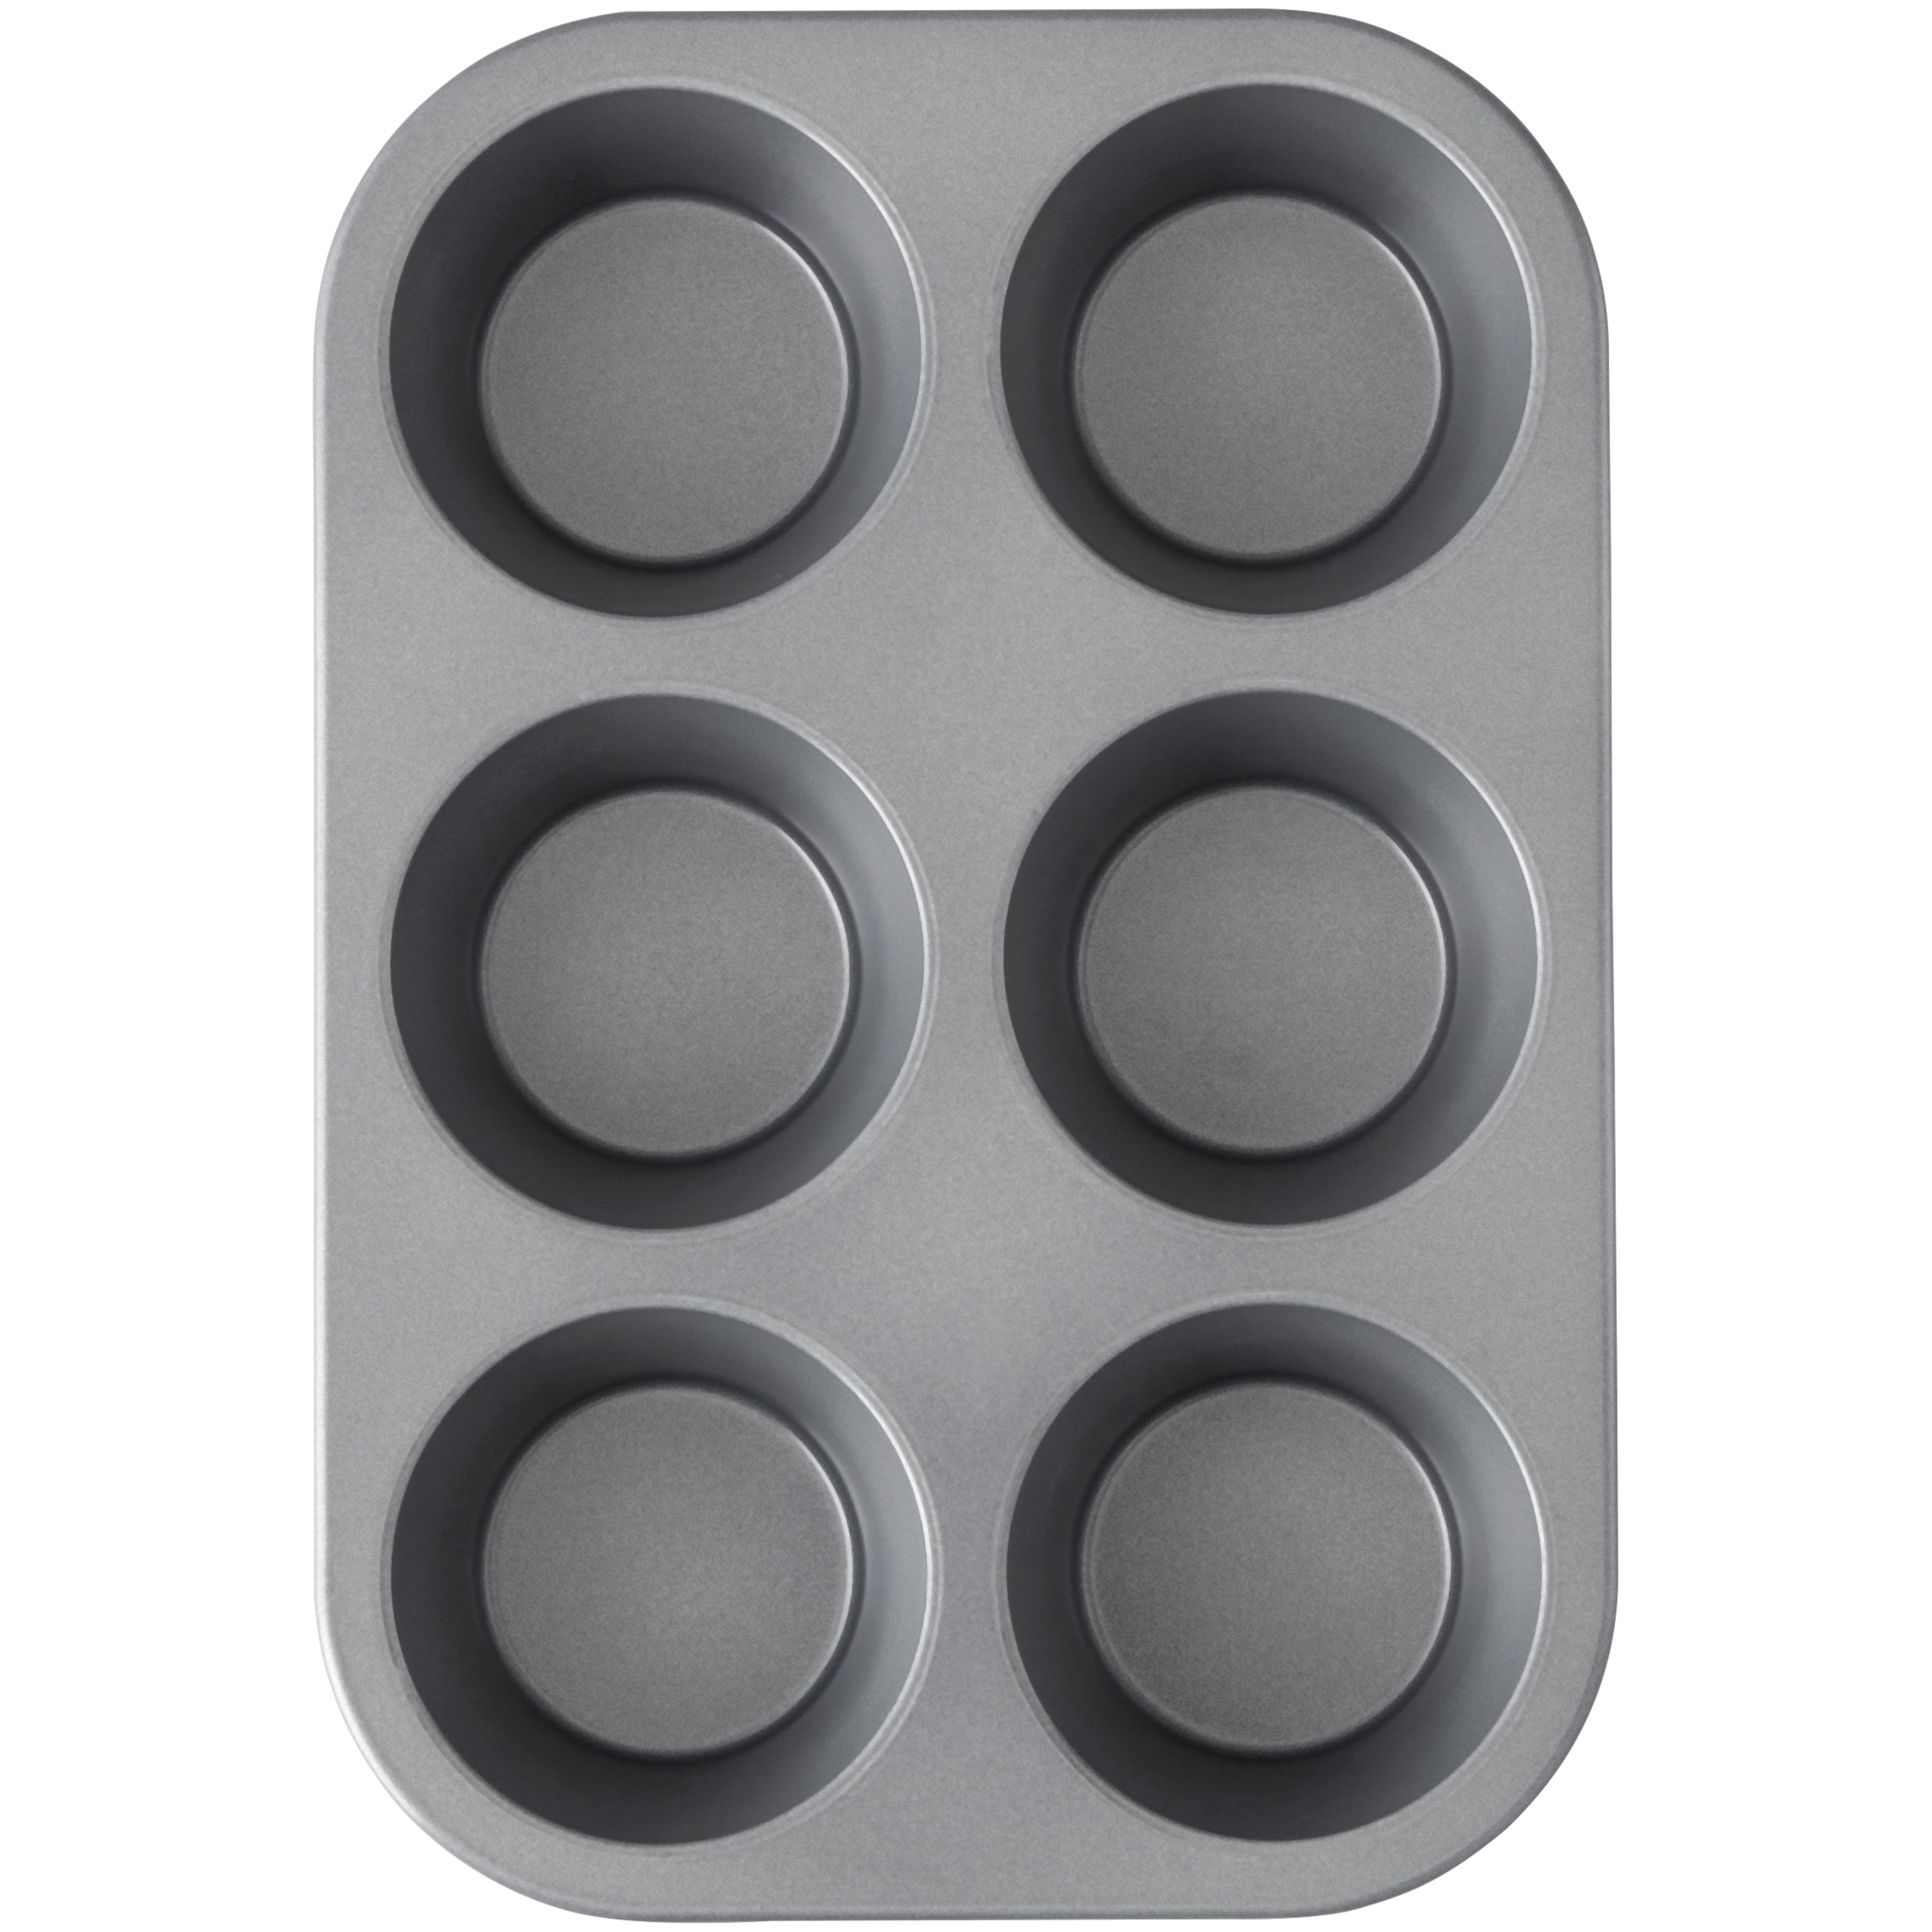 Easy to Clean and Perfect for Making Jumbo Muffins or Mini Cakes OvenStuff Non-Stick 6 Cup Jumbo Muffin Pan American-Made Non-Stick Baking Pans .2 Count - 6 Cup Jumbo 